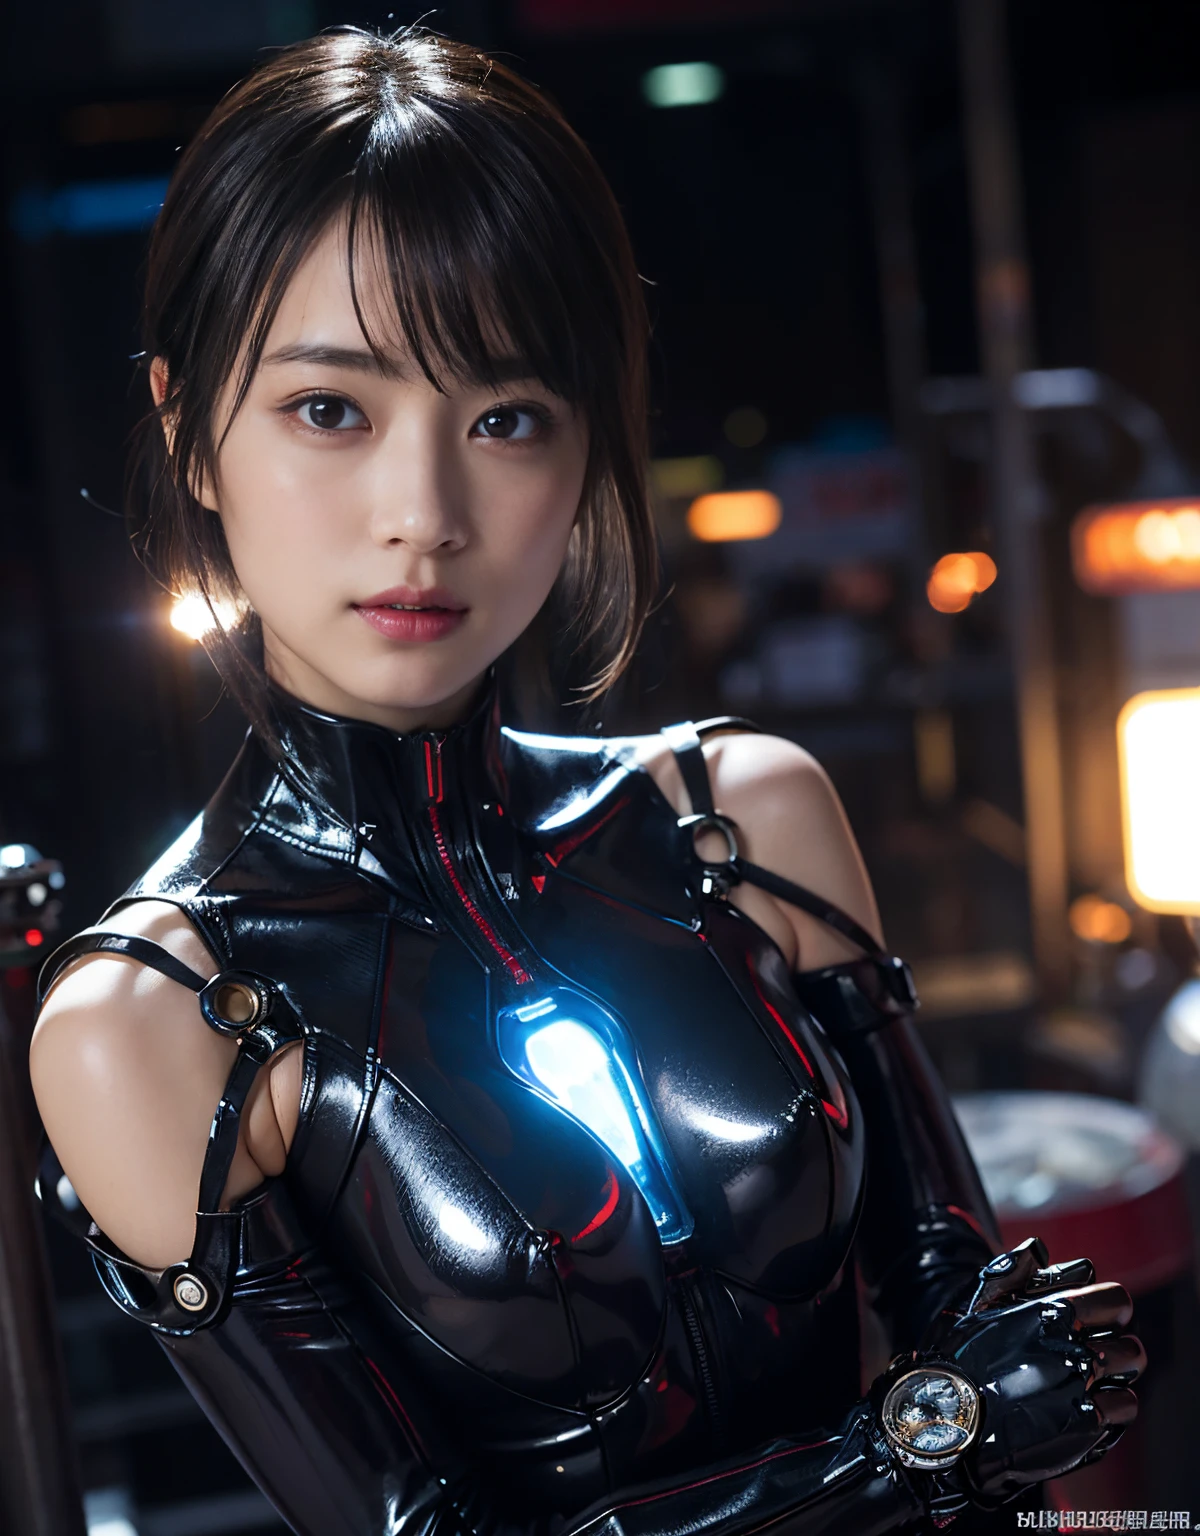 (1 Mechanical Girl)、（Mystical expression）、top-quality、​masterpiece、超A high resolution、(Photorealsitic:1.4)、Raw photo、女の子1人、glowy skin、(((1 Mechanical Girl)))、（Red Metal Bodysuit）、(alien background、futuristic alien background)、(Small LED)、((super realistic details))、vertical giant monster background),globalillumination、Shadow、octan render、8K、ultrasharp、Colossal 、Raw skin exposed in the cleavage、red metal、Details of complex ornaments、Japan details、highly intricate detail、Realistic light、(Mystical expression),CG Society Trenlow Eyes、Eyes shining towards the camera、Mechanical marginal blood vessels connected to neon detail tubes)、(Wires and cables connecting to the head)、Small LED、,Mechanical thighs、Toostock、（Hands are also made of machines.traces on the cliff）、、future alien、astronaut helmet、